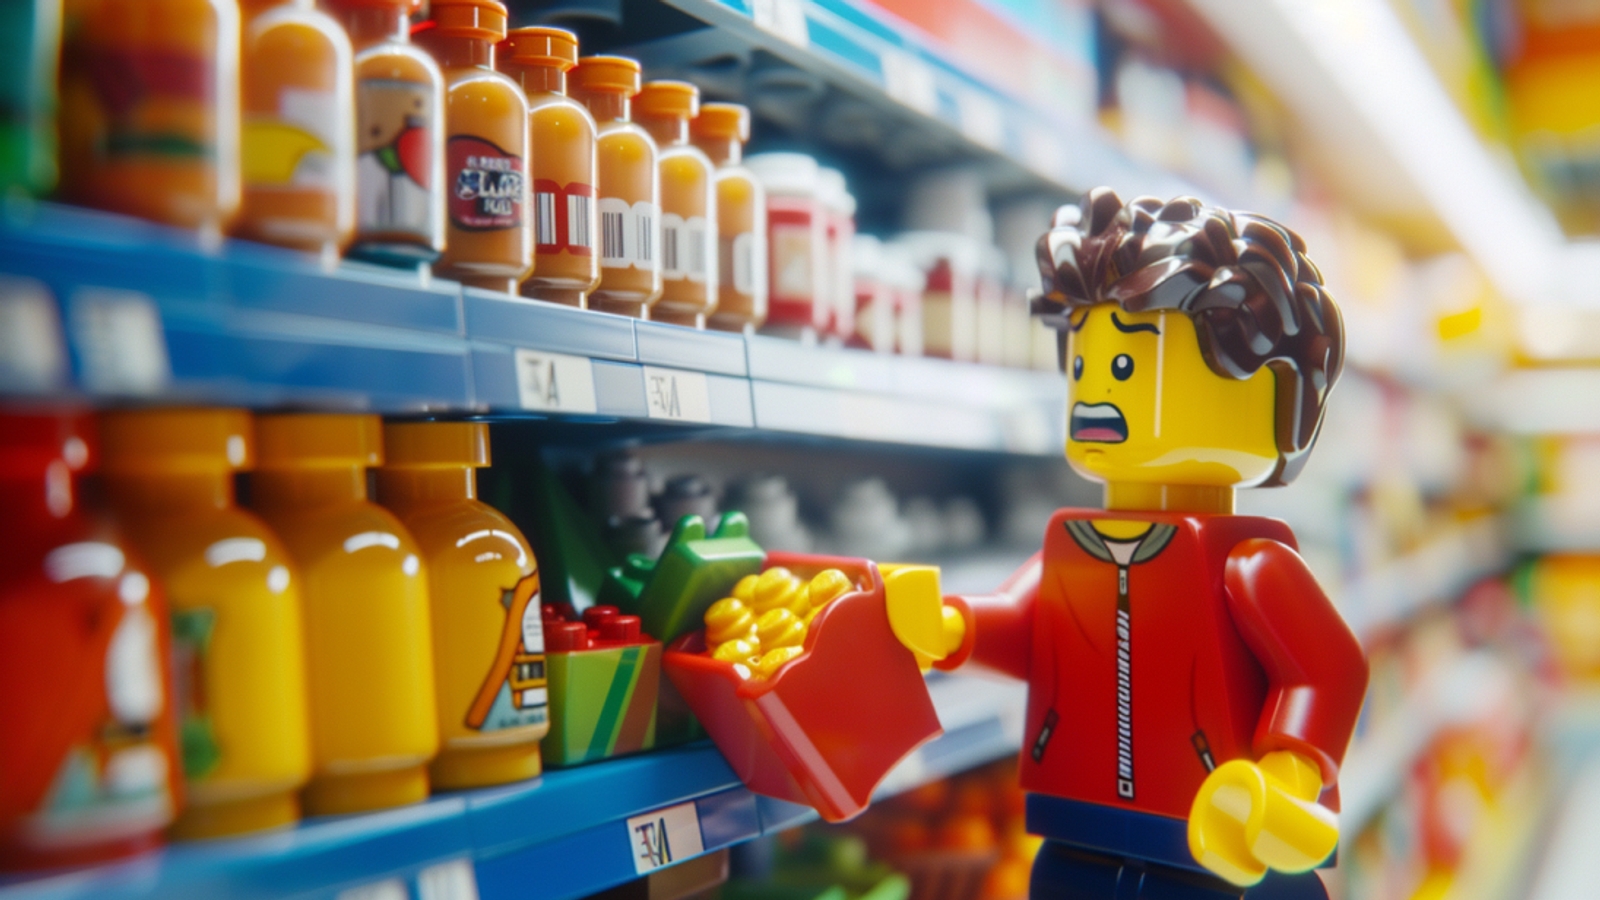 A LEGO man confused, looking at a supermarket shelf